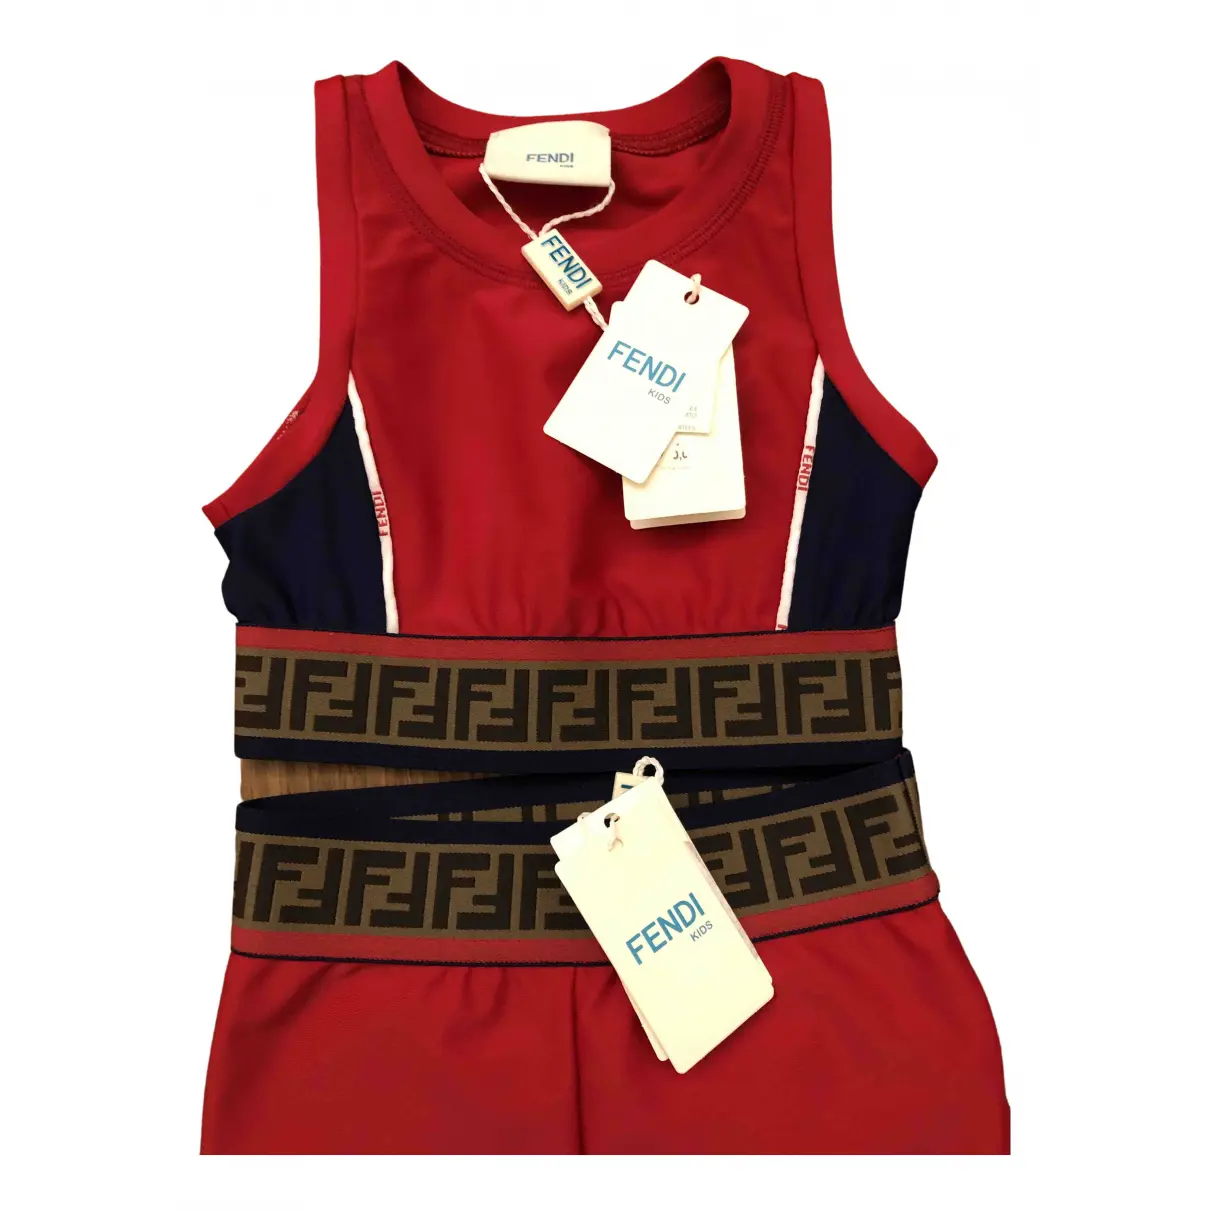 Buy Fendi Outfit online